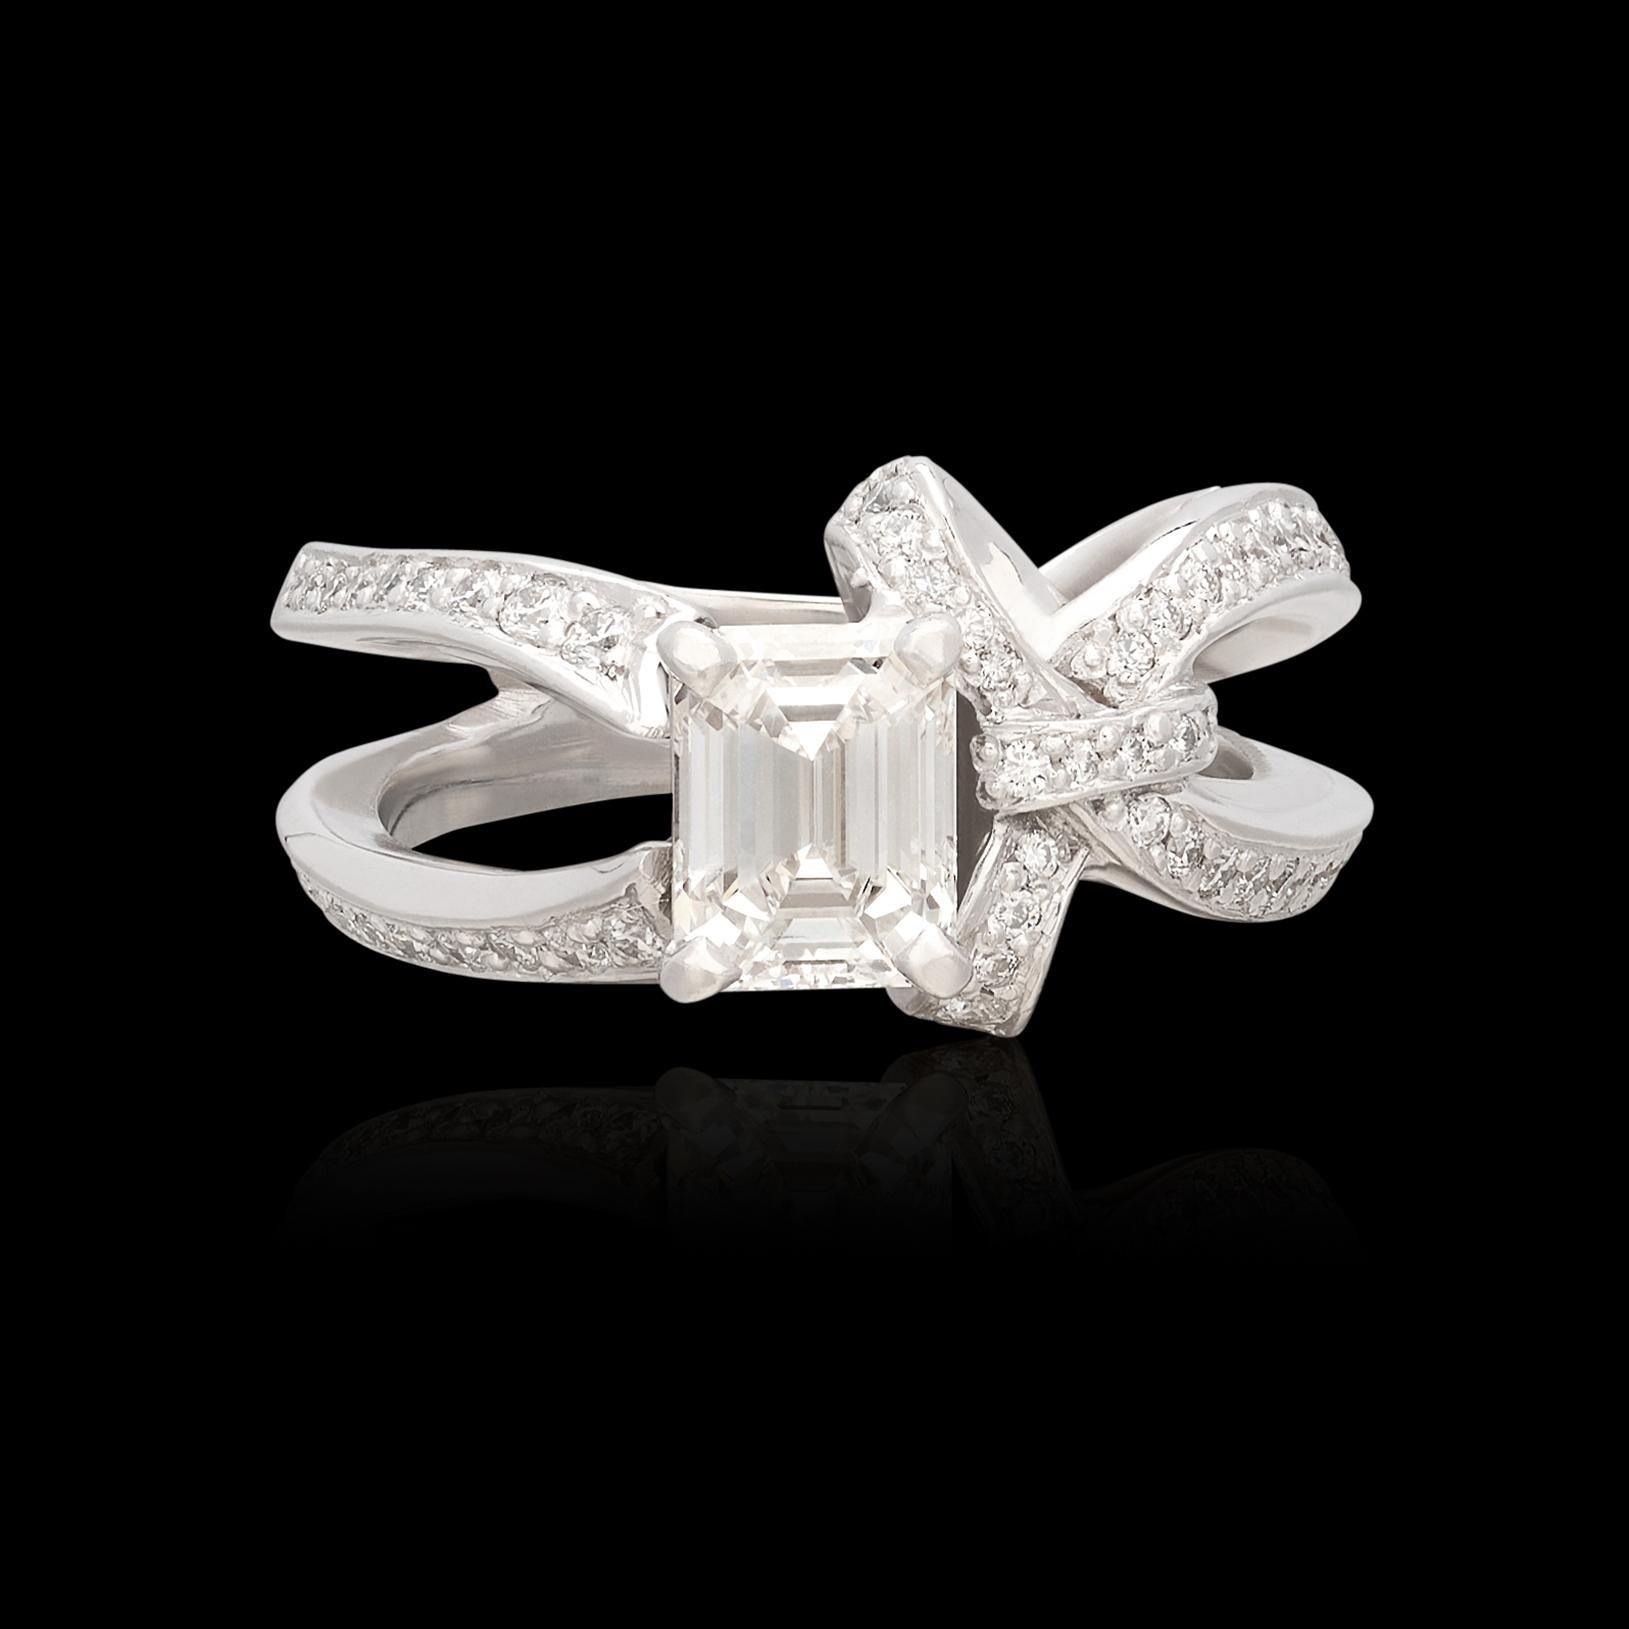 A truly unique twist on an engagement ring, featuring a truly special diamond. This white gold beauty showcases an incredibly fine 1.21 carat Emerald Cut Diamond graded by the Gemological Institute of America as F color and VS1 clarity (GIA report